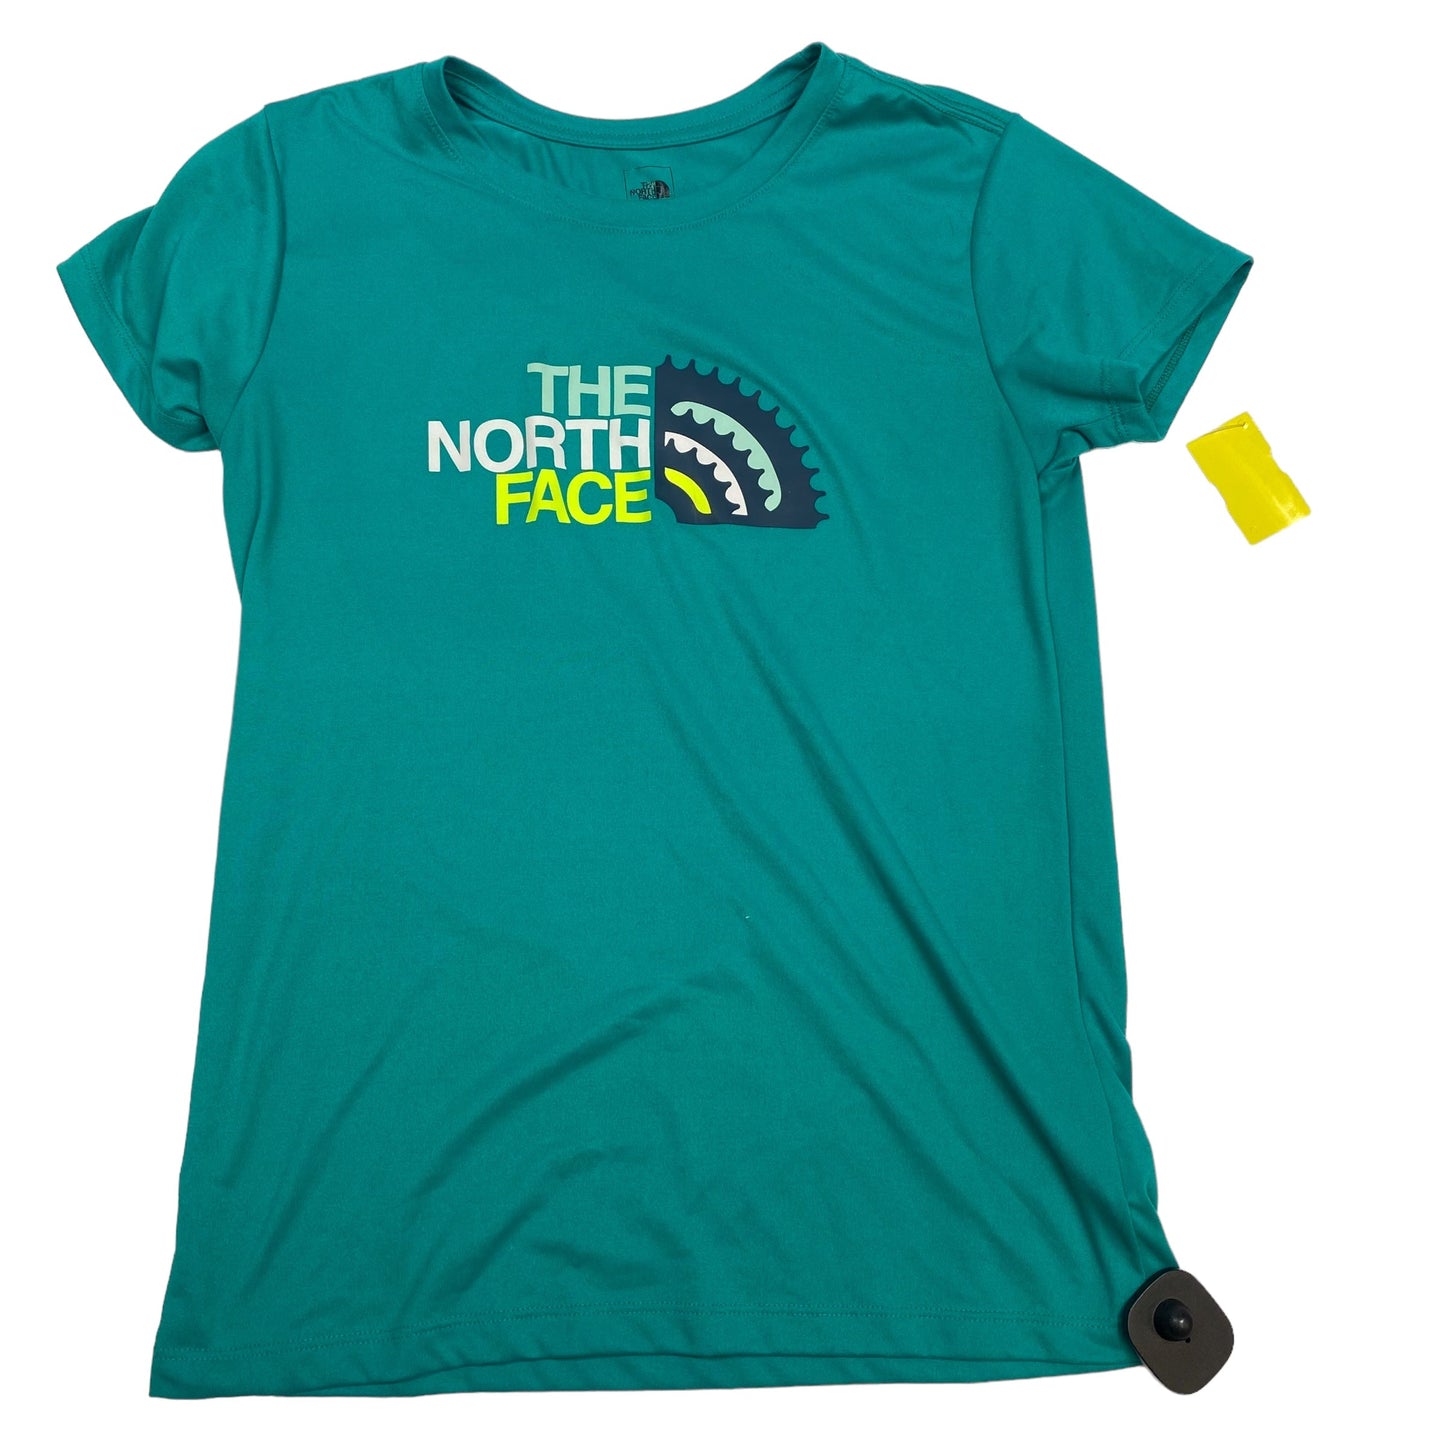 Green Athletic Top Short Sleeve The North Face, Size M